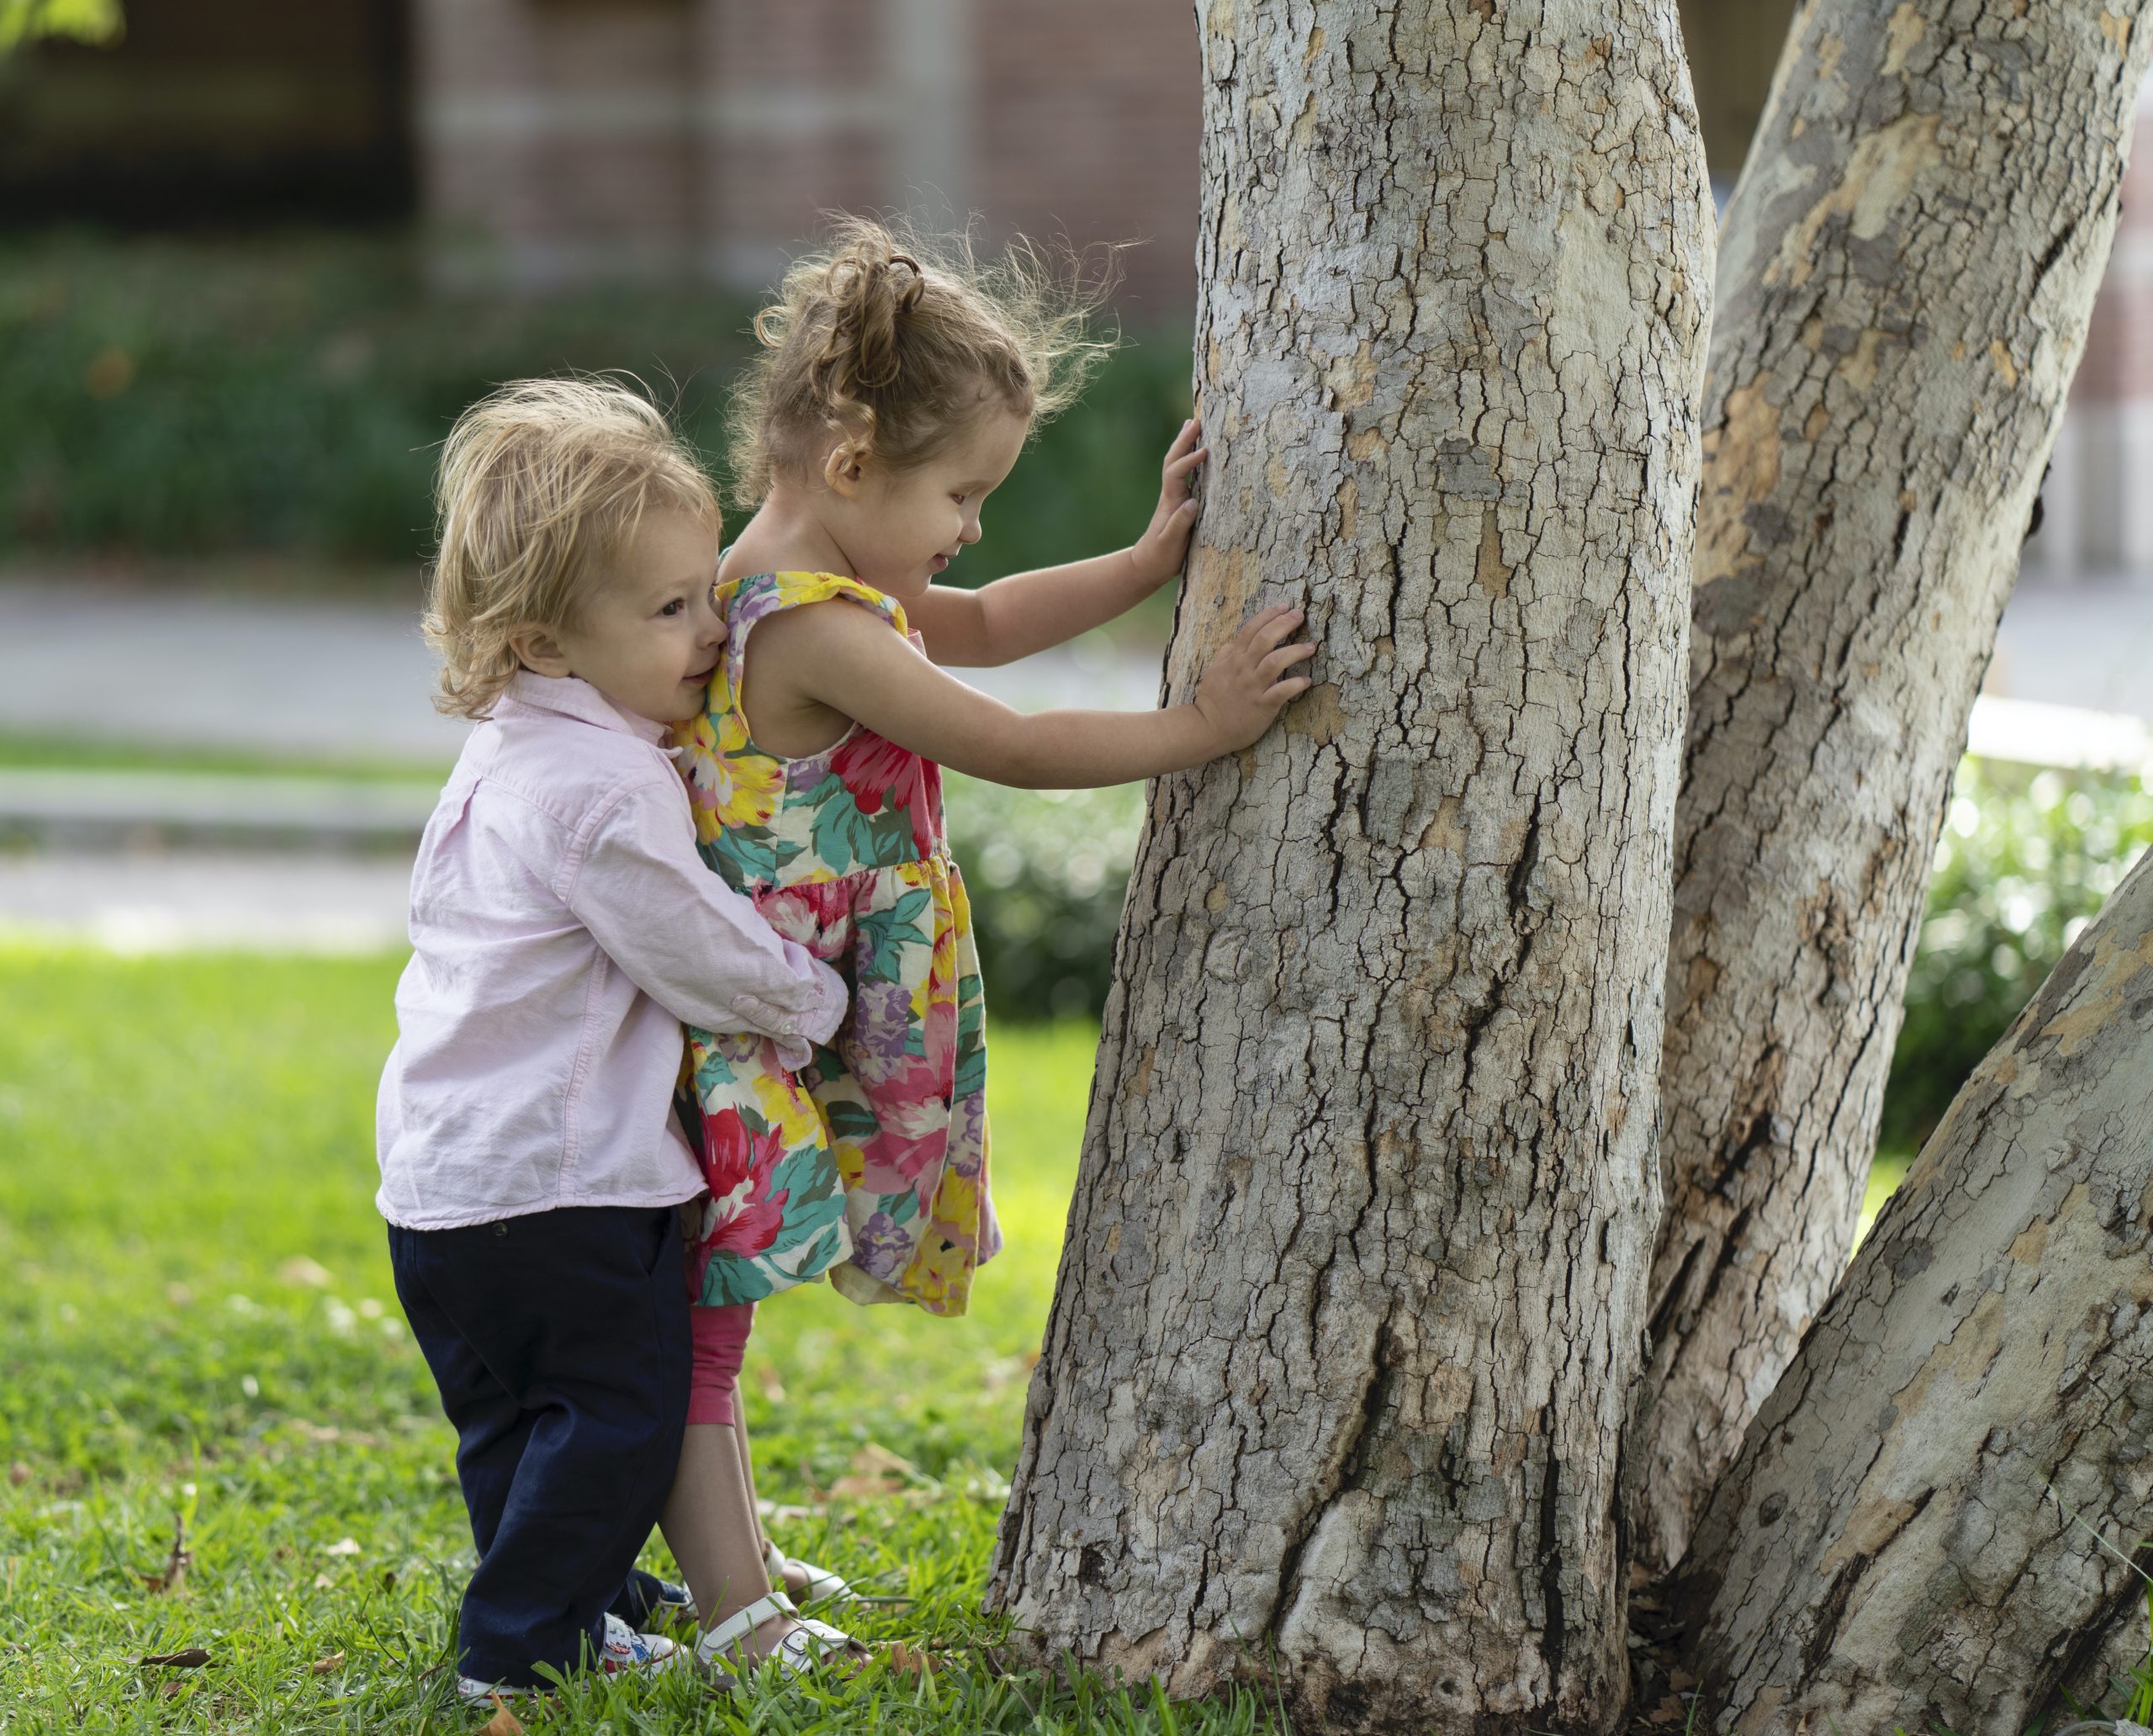 Here, Ellie (wearing a floral print dress and pigtails) explores a tree on the UCLA campus with her hands while her baby brother Sebastian gives her a big hug from behind (he is also blonde and wearing a pink shirt).